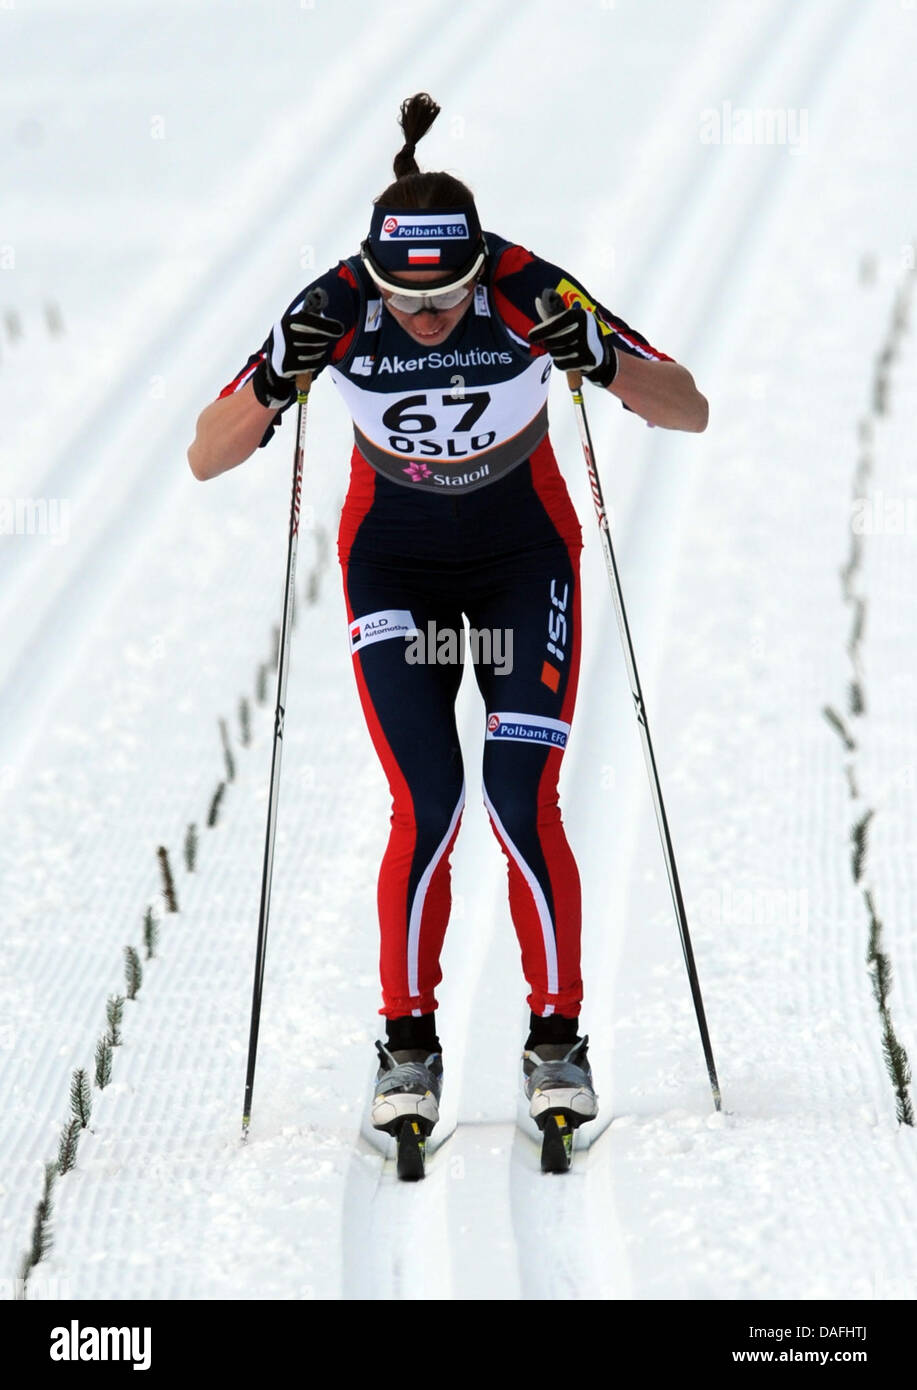 Second-placed Justyna Kowalczyk from Poland competes in the women's 10 km individual cross country skiing competition at the Nordic Skiing World Championships in Oslo, Norway, 28 February 2011. Photo: PATRICK SEEGER Stock Photo